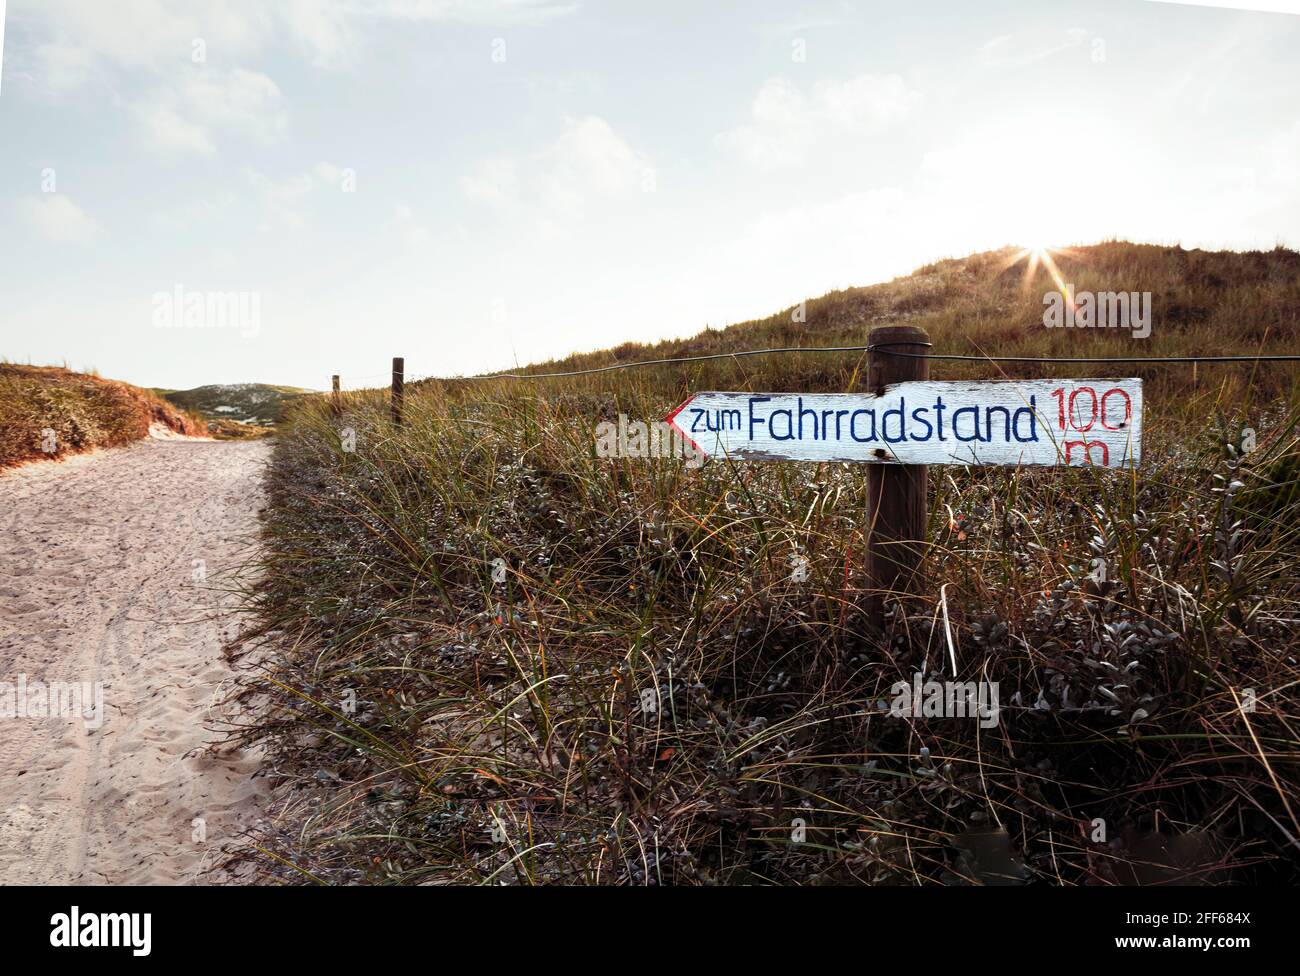 Sand pathway between green vegetation on coastal sand dunes. Wooden sign in German indicating direction to bike parking place. Stock Photo